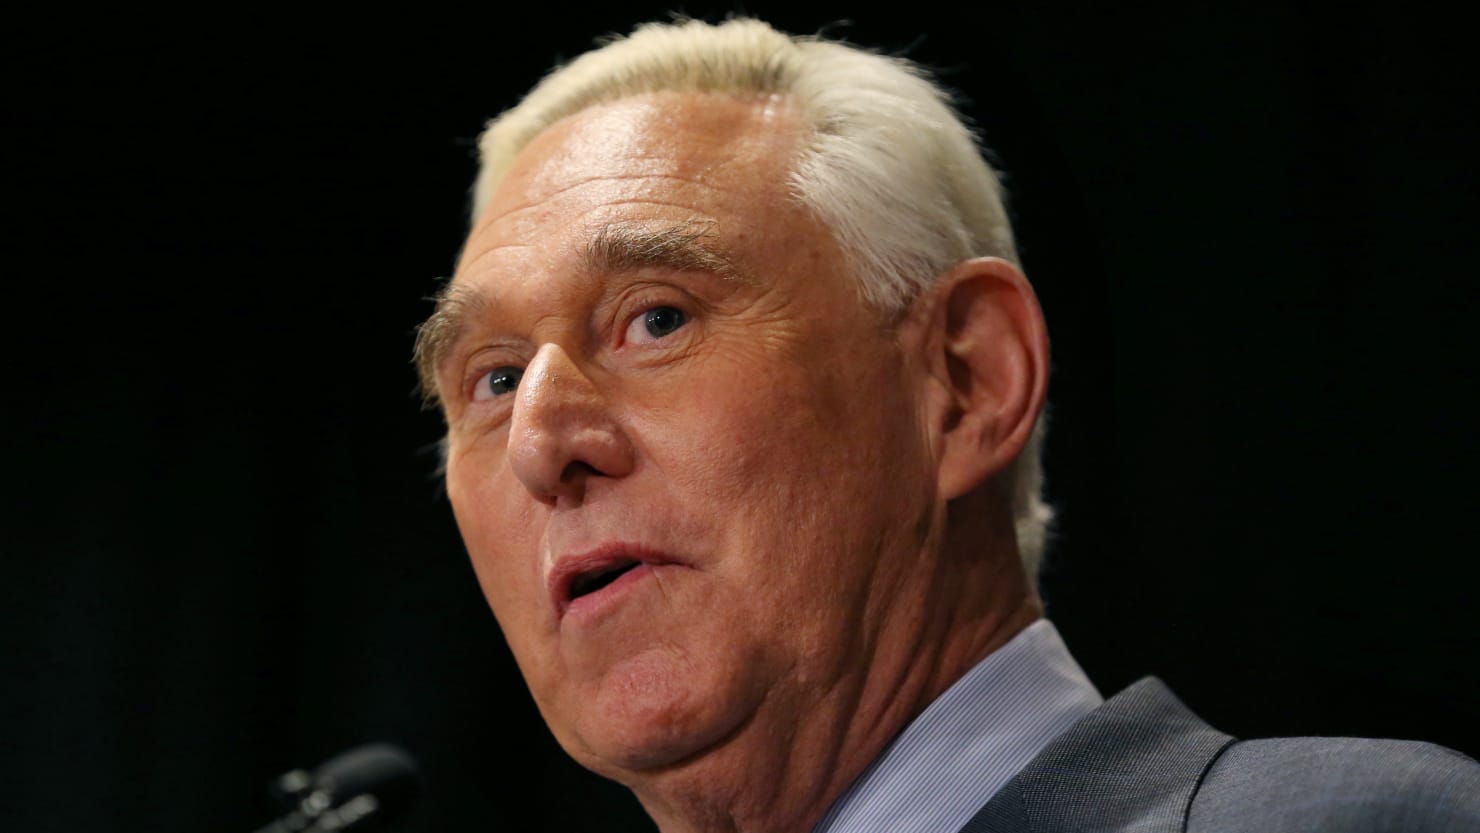 Ex-Trump Adviser Roger Stone Finally Agrees to Pay $2 Million in Back Taxes